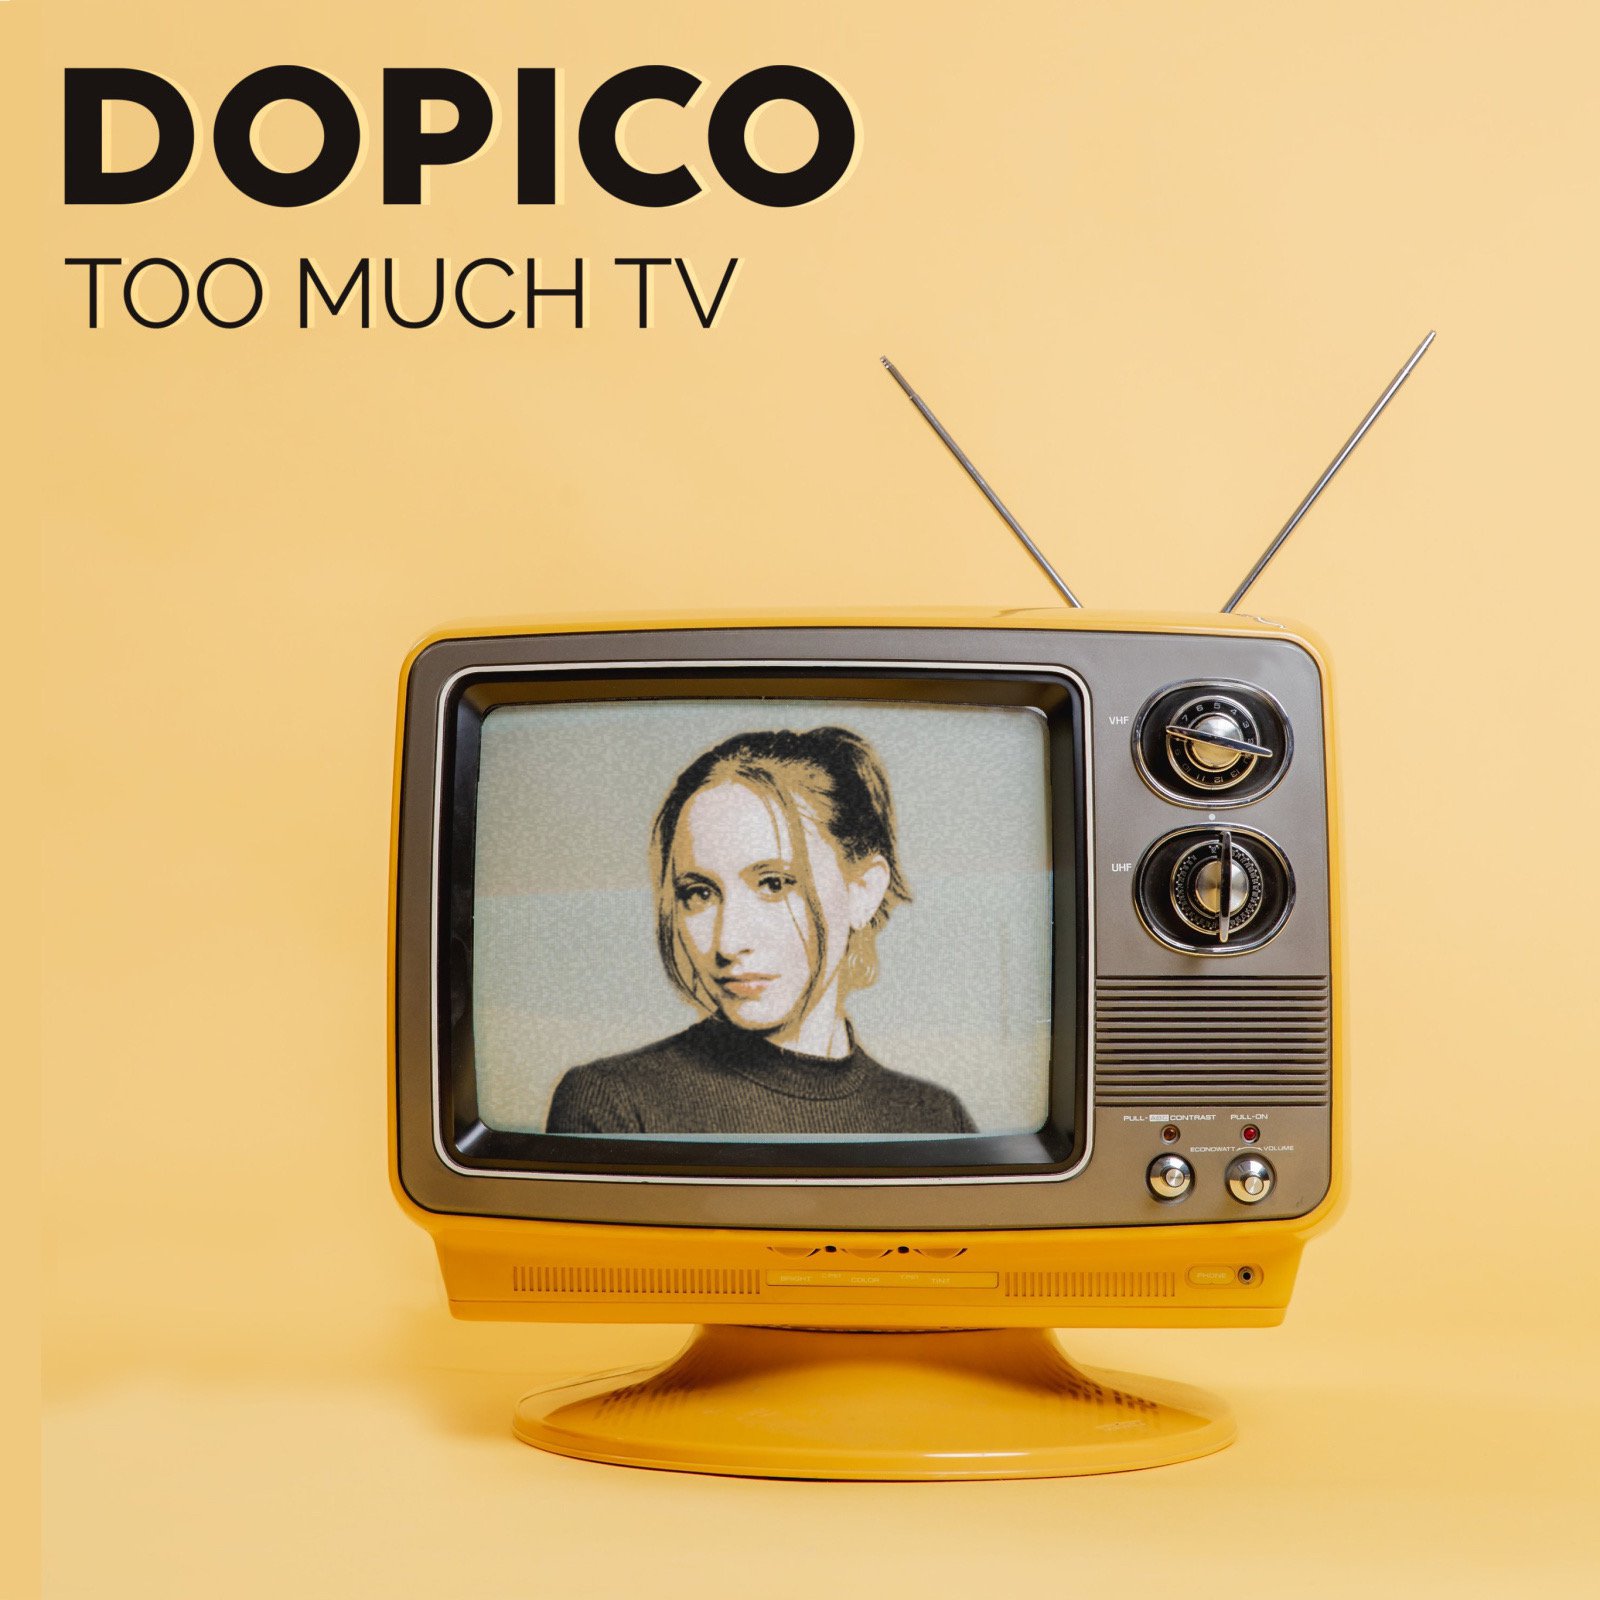 too much tv - by - dopico - New York - new music - indie music - indie rock - music blog - indie blog - wolf in a suit - wolfinasuit - wolf in a suit blog - wolf in a suit music blog